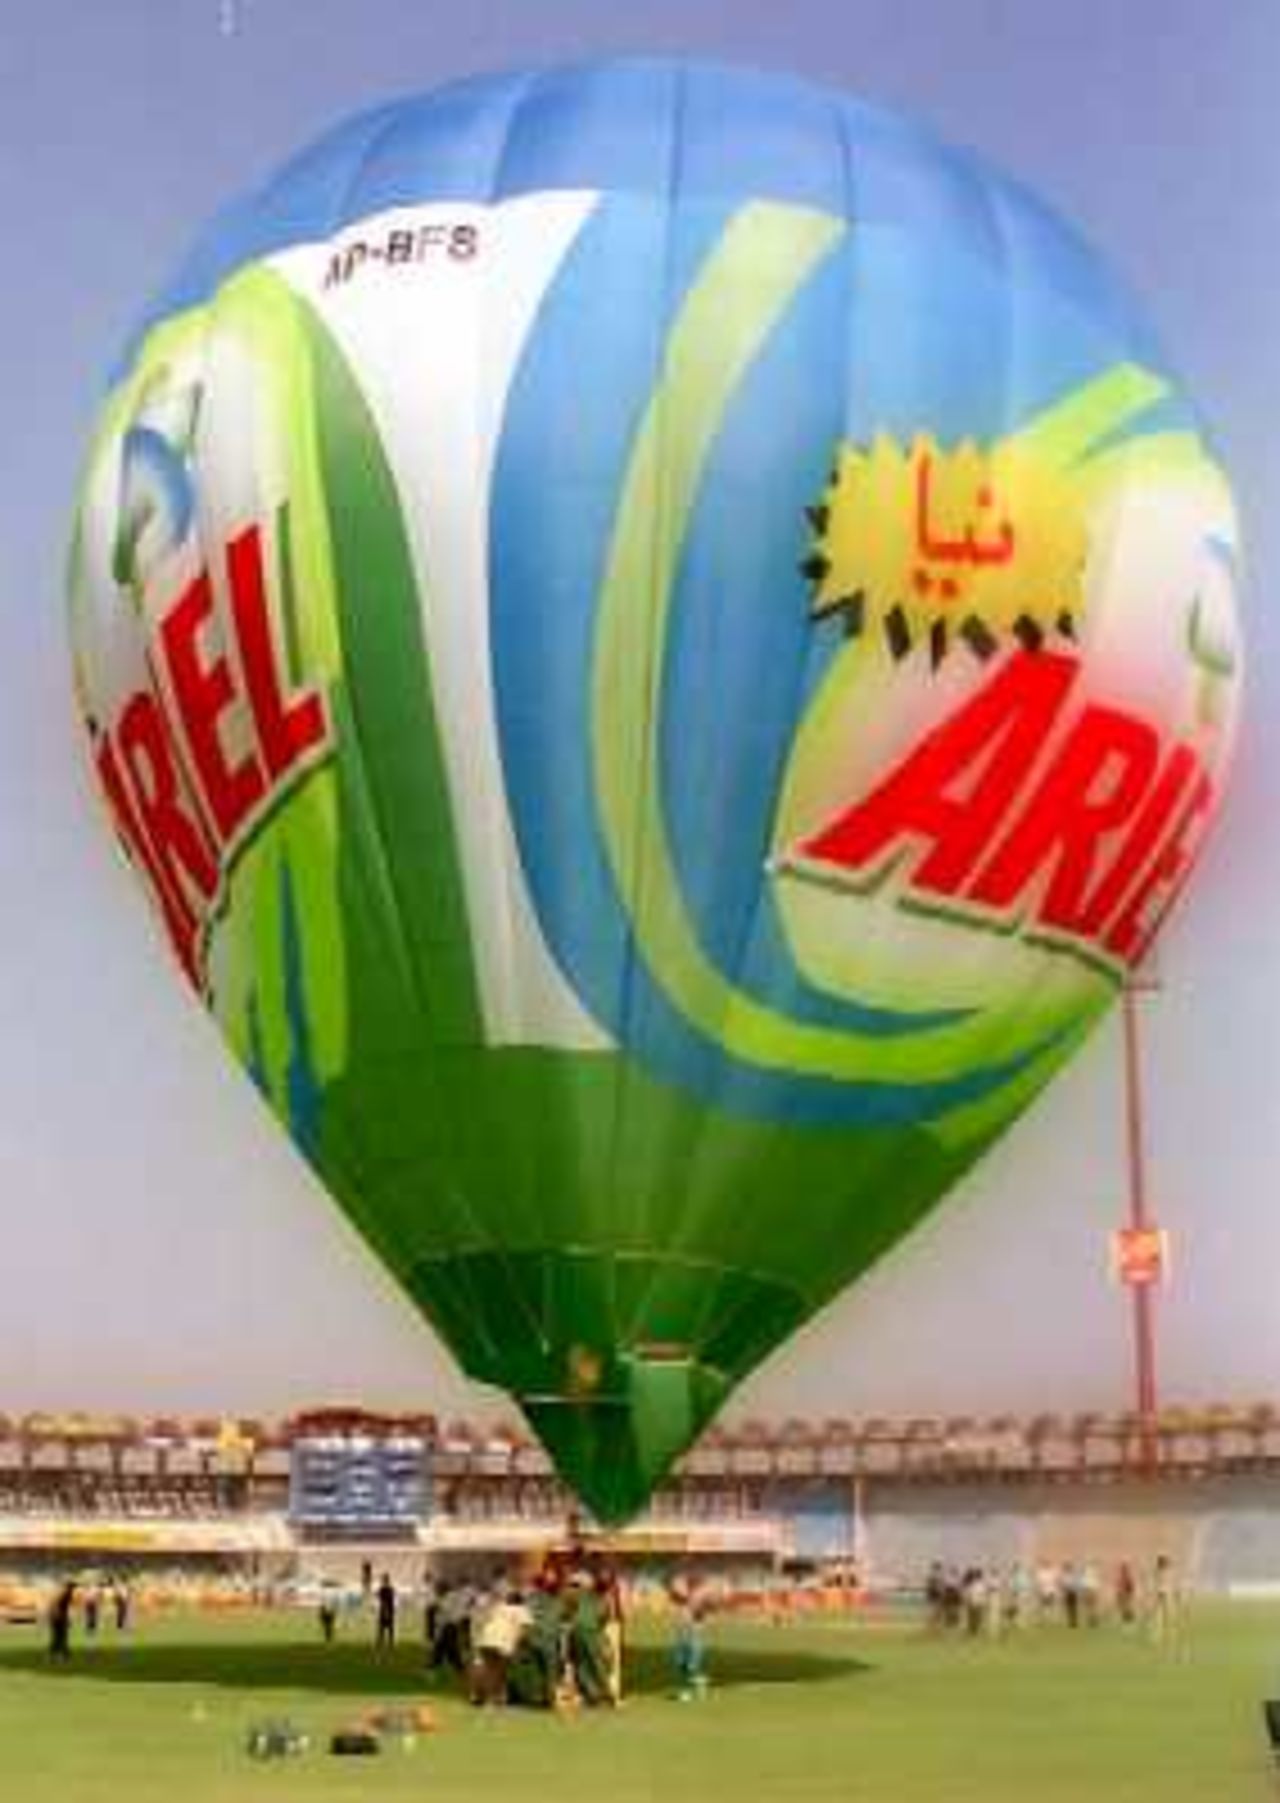 This colorful balloon marks the opening of the second ODI between Pakistan and England, England v Pakistan, 2nd ODI At Gaddafi Stadium Lahore, 27 October 2000